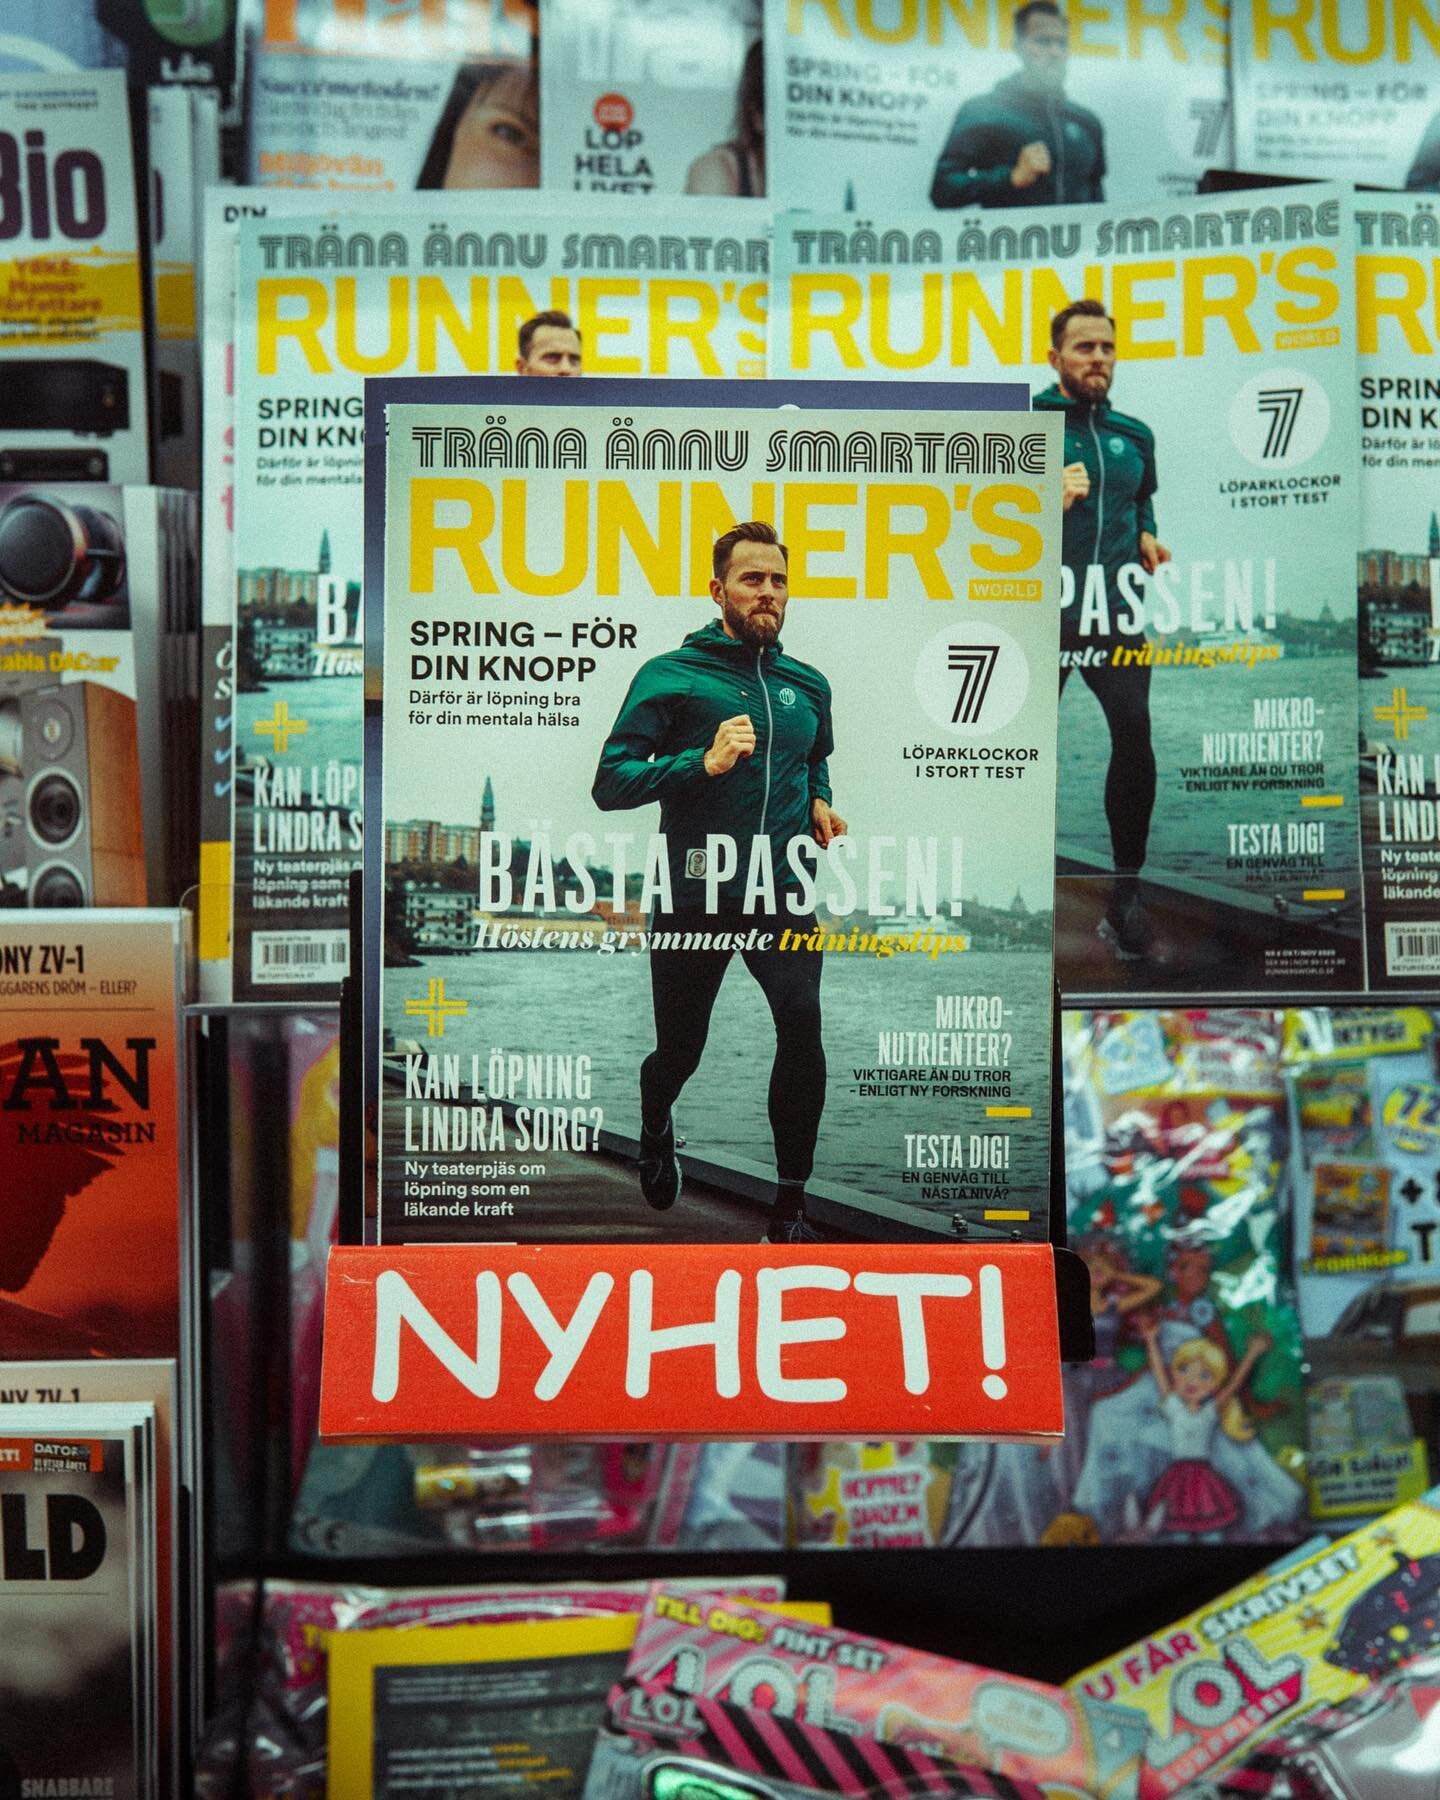 🤯 Big week for me with my first ever magazine front cover photo being out in stores in all of Sweden! 

Thank you @peter_haggstrom and @runnersworldswe for making this happen.